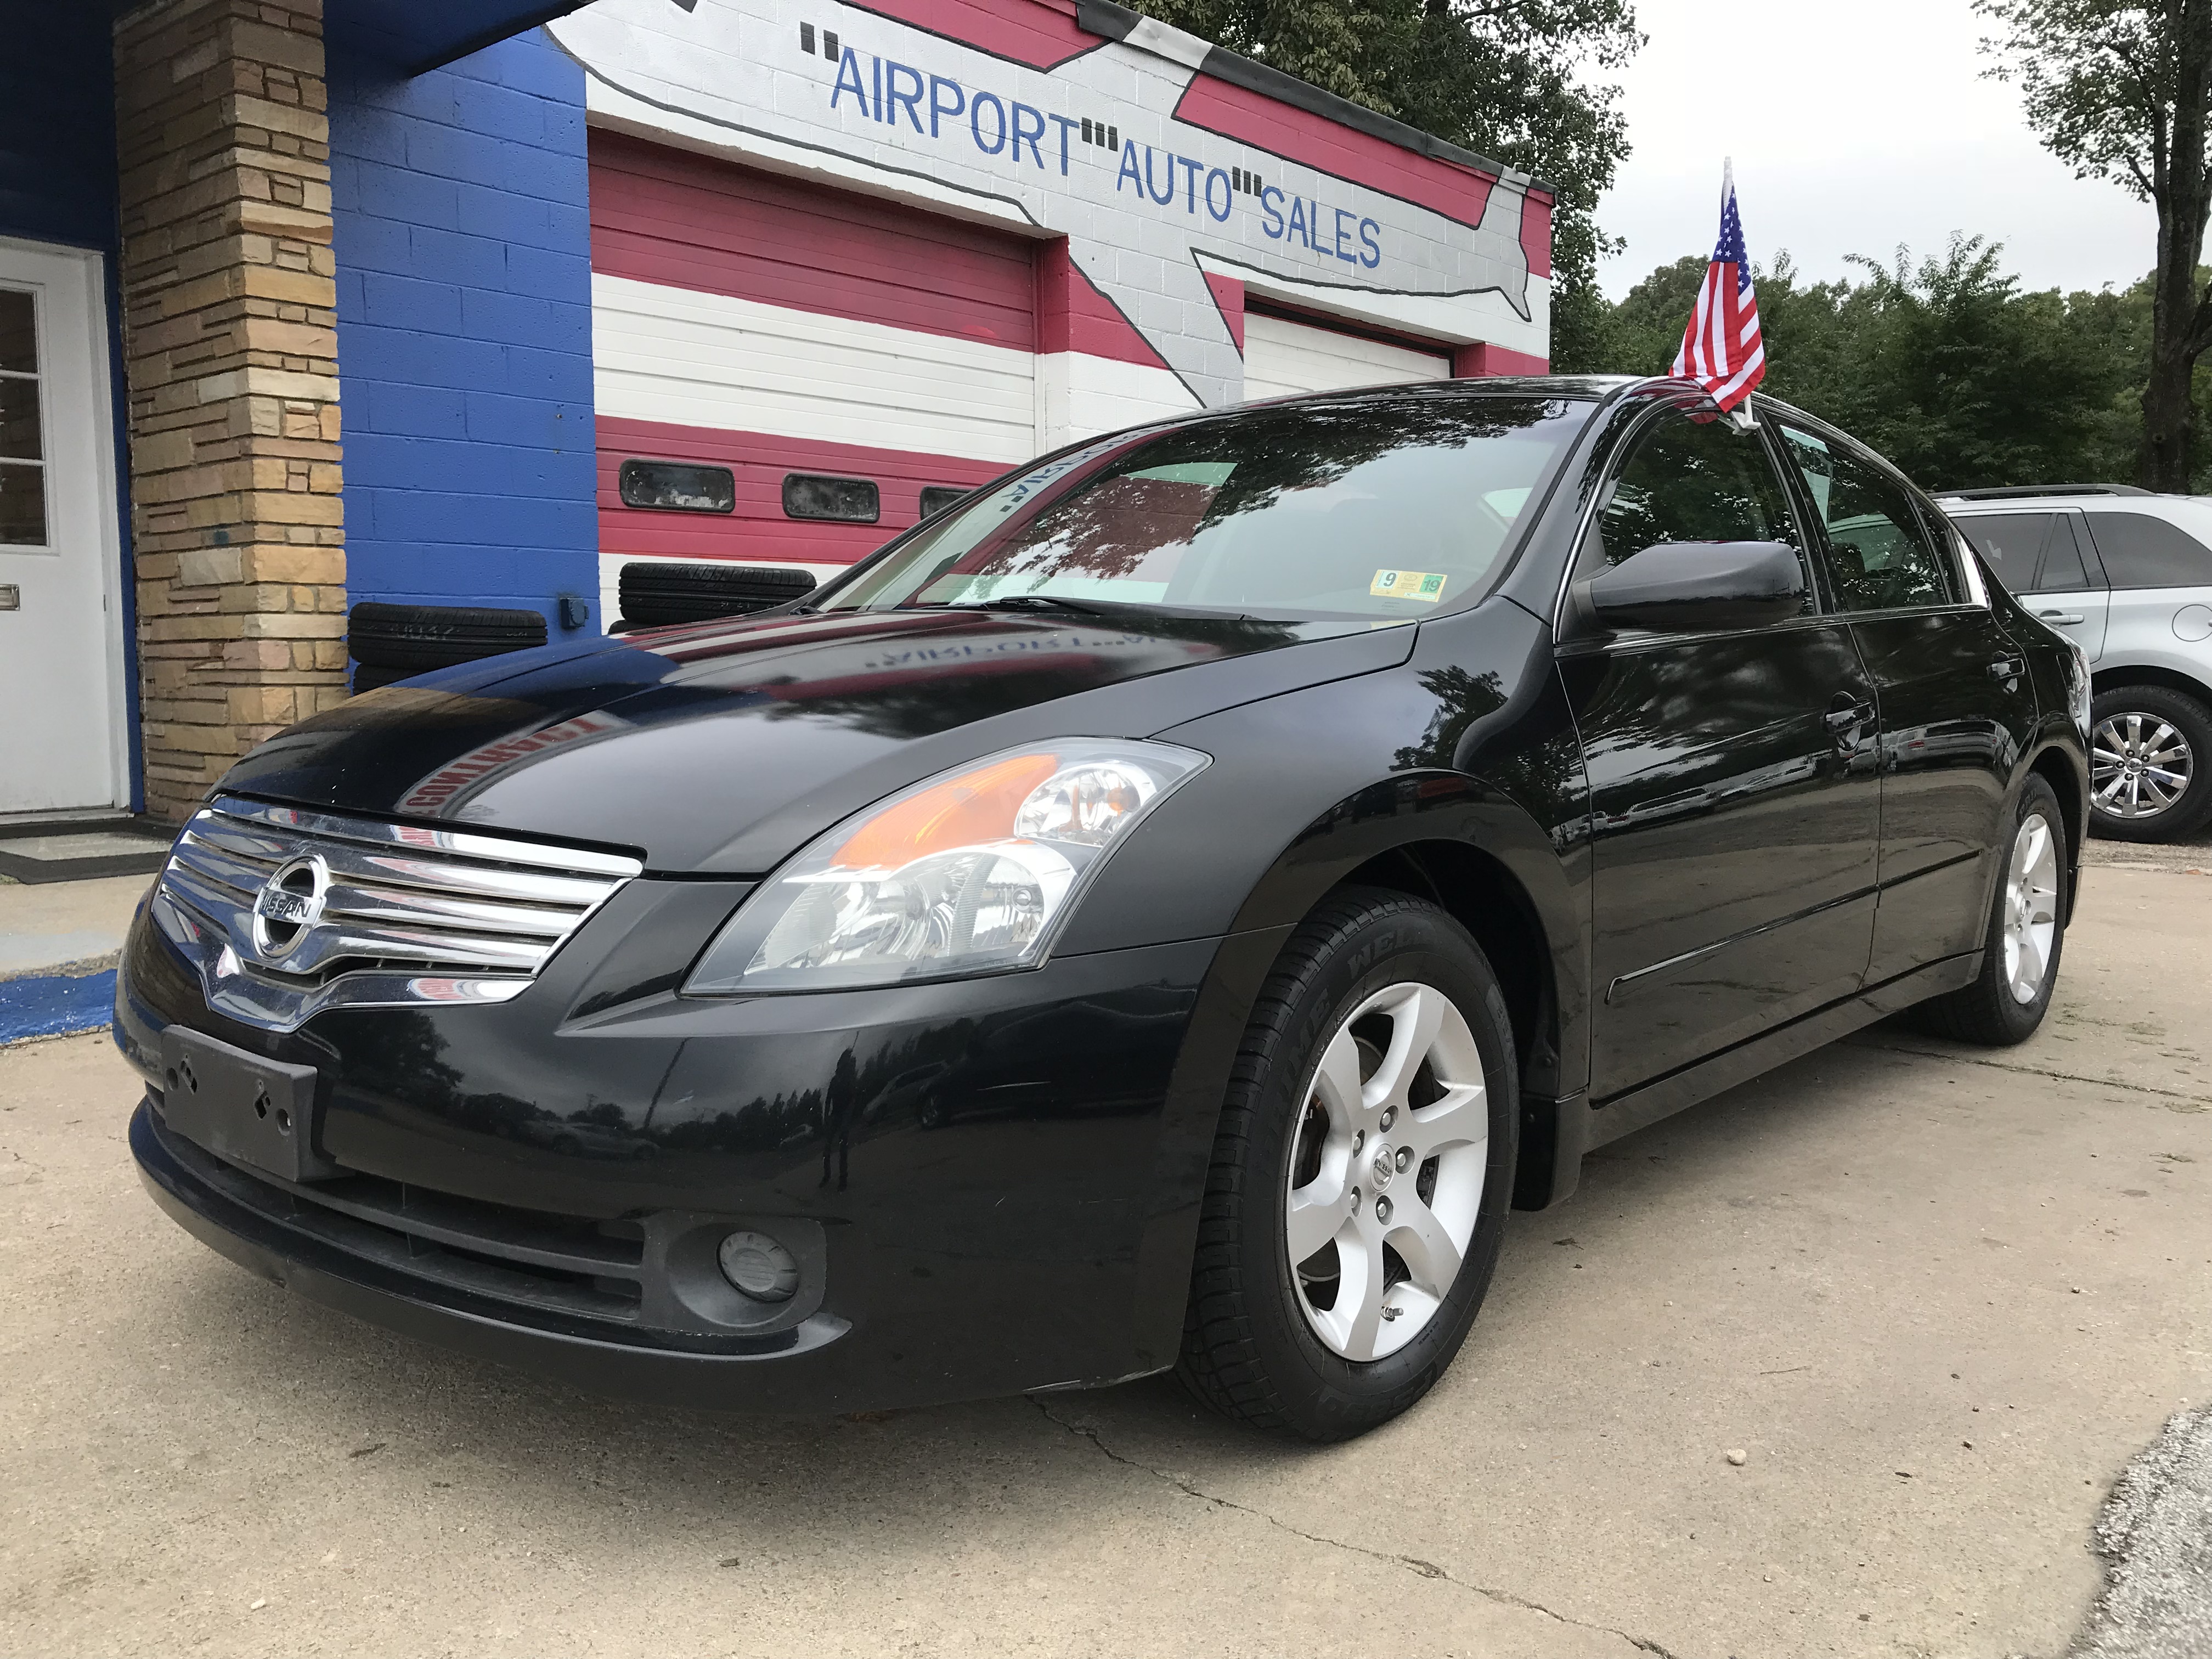 Buy Used Cars In Virginia 2008 Nissan Altima 2 5 Used